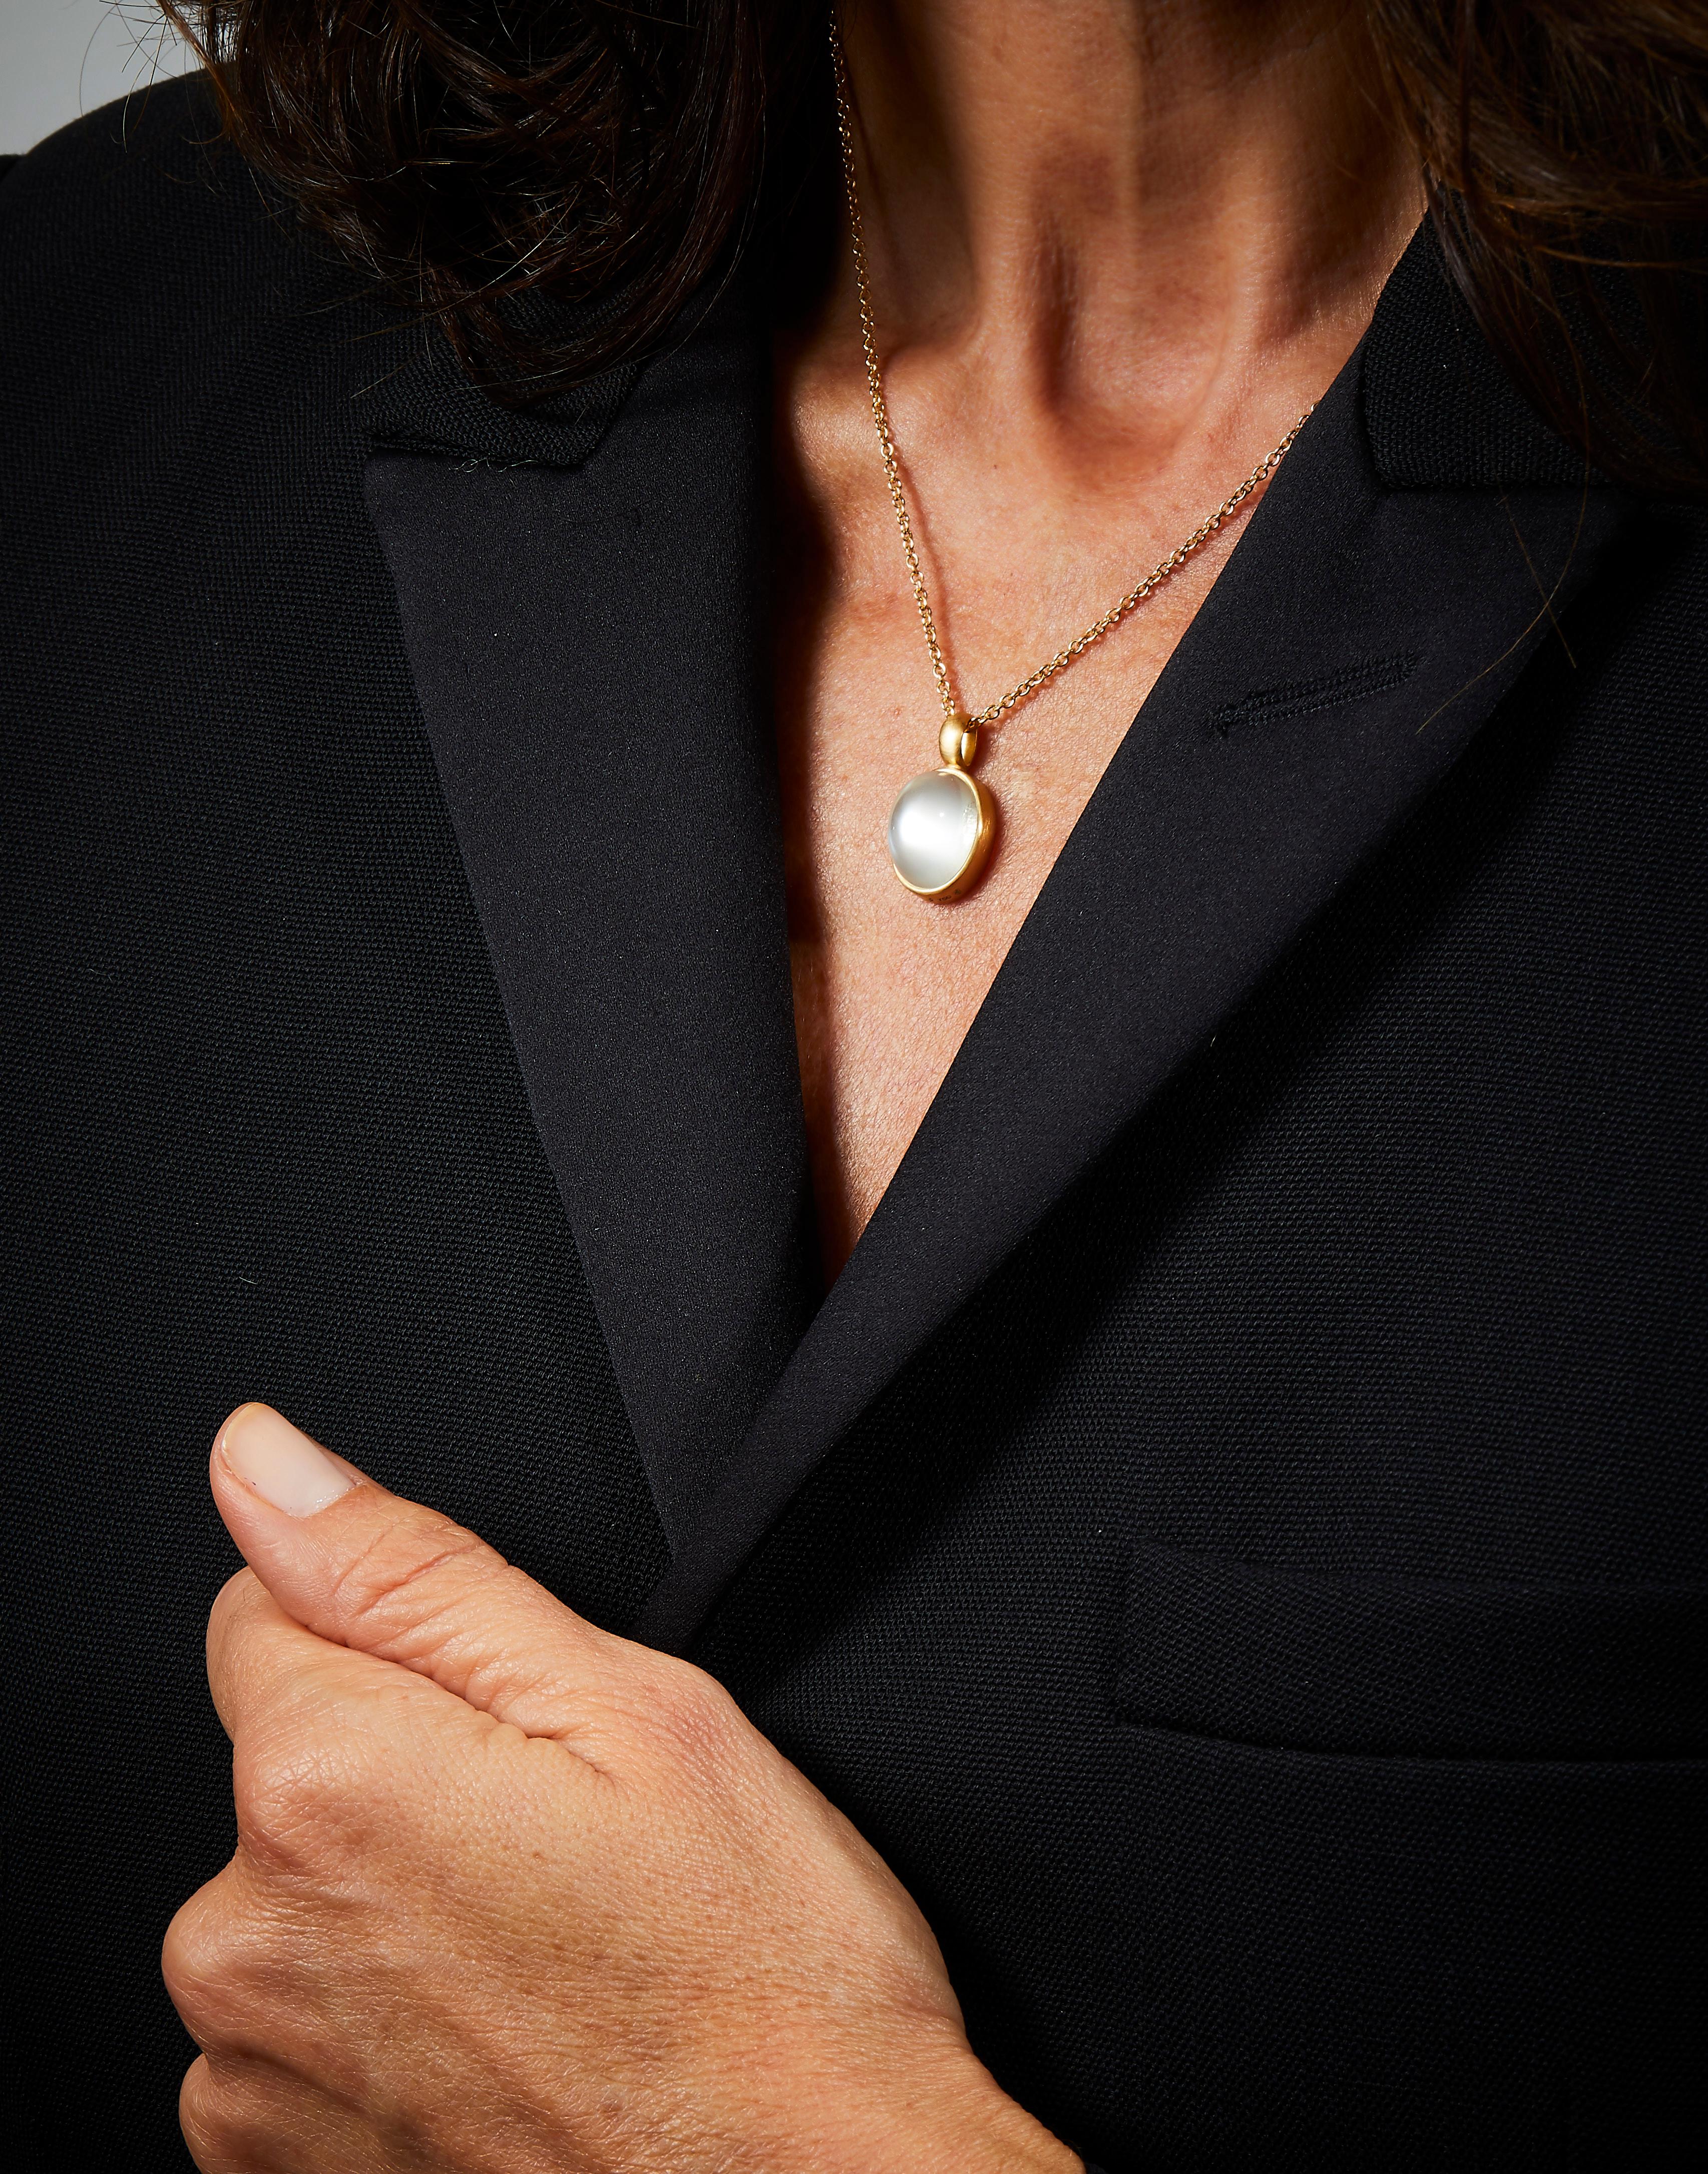 Designed by Eva Soussana, artist and founder of Hera-Jewellery, these elegant and refined pendant necklace is from the 